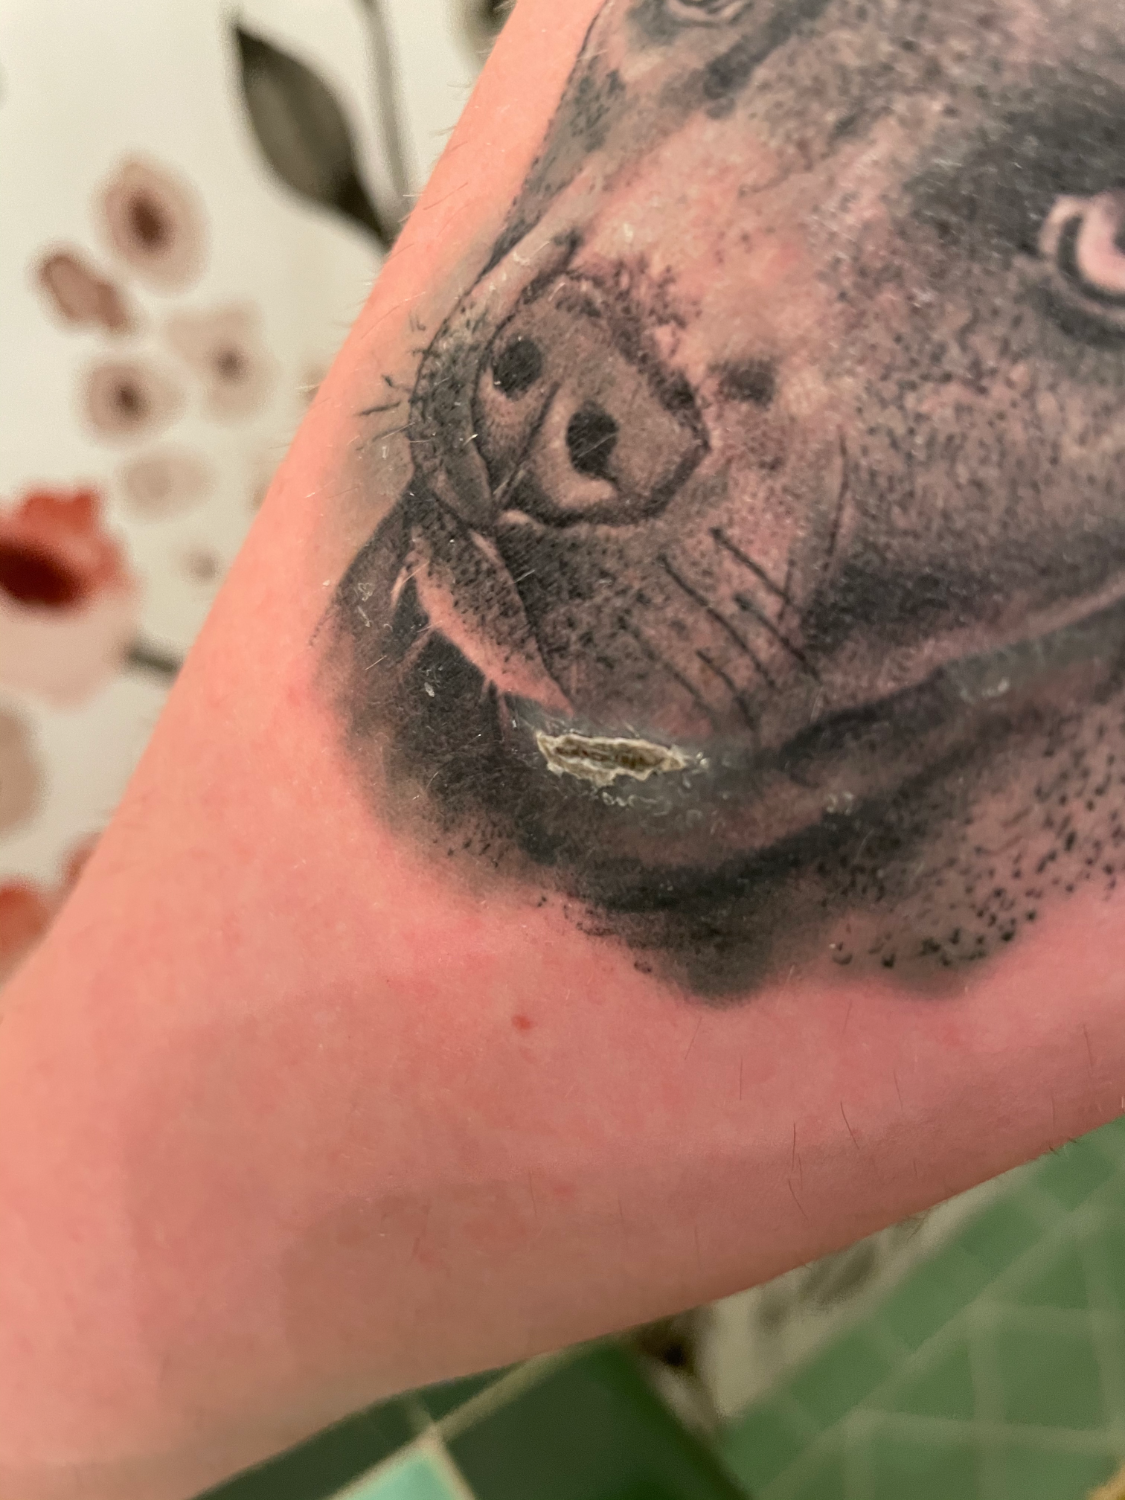 Ink and infection 10 percent have skin problems after getting tattoos   The Washington Post